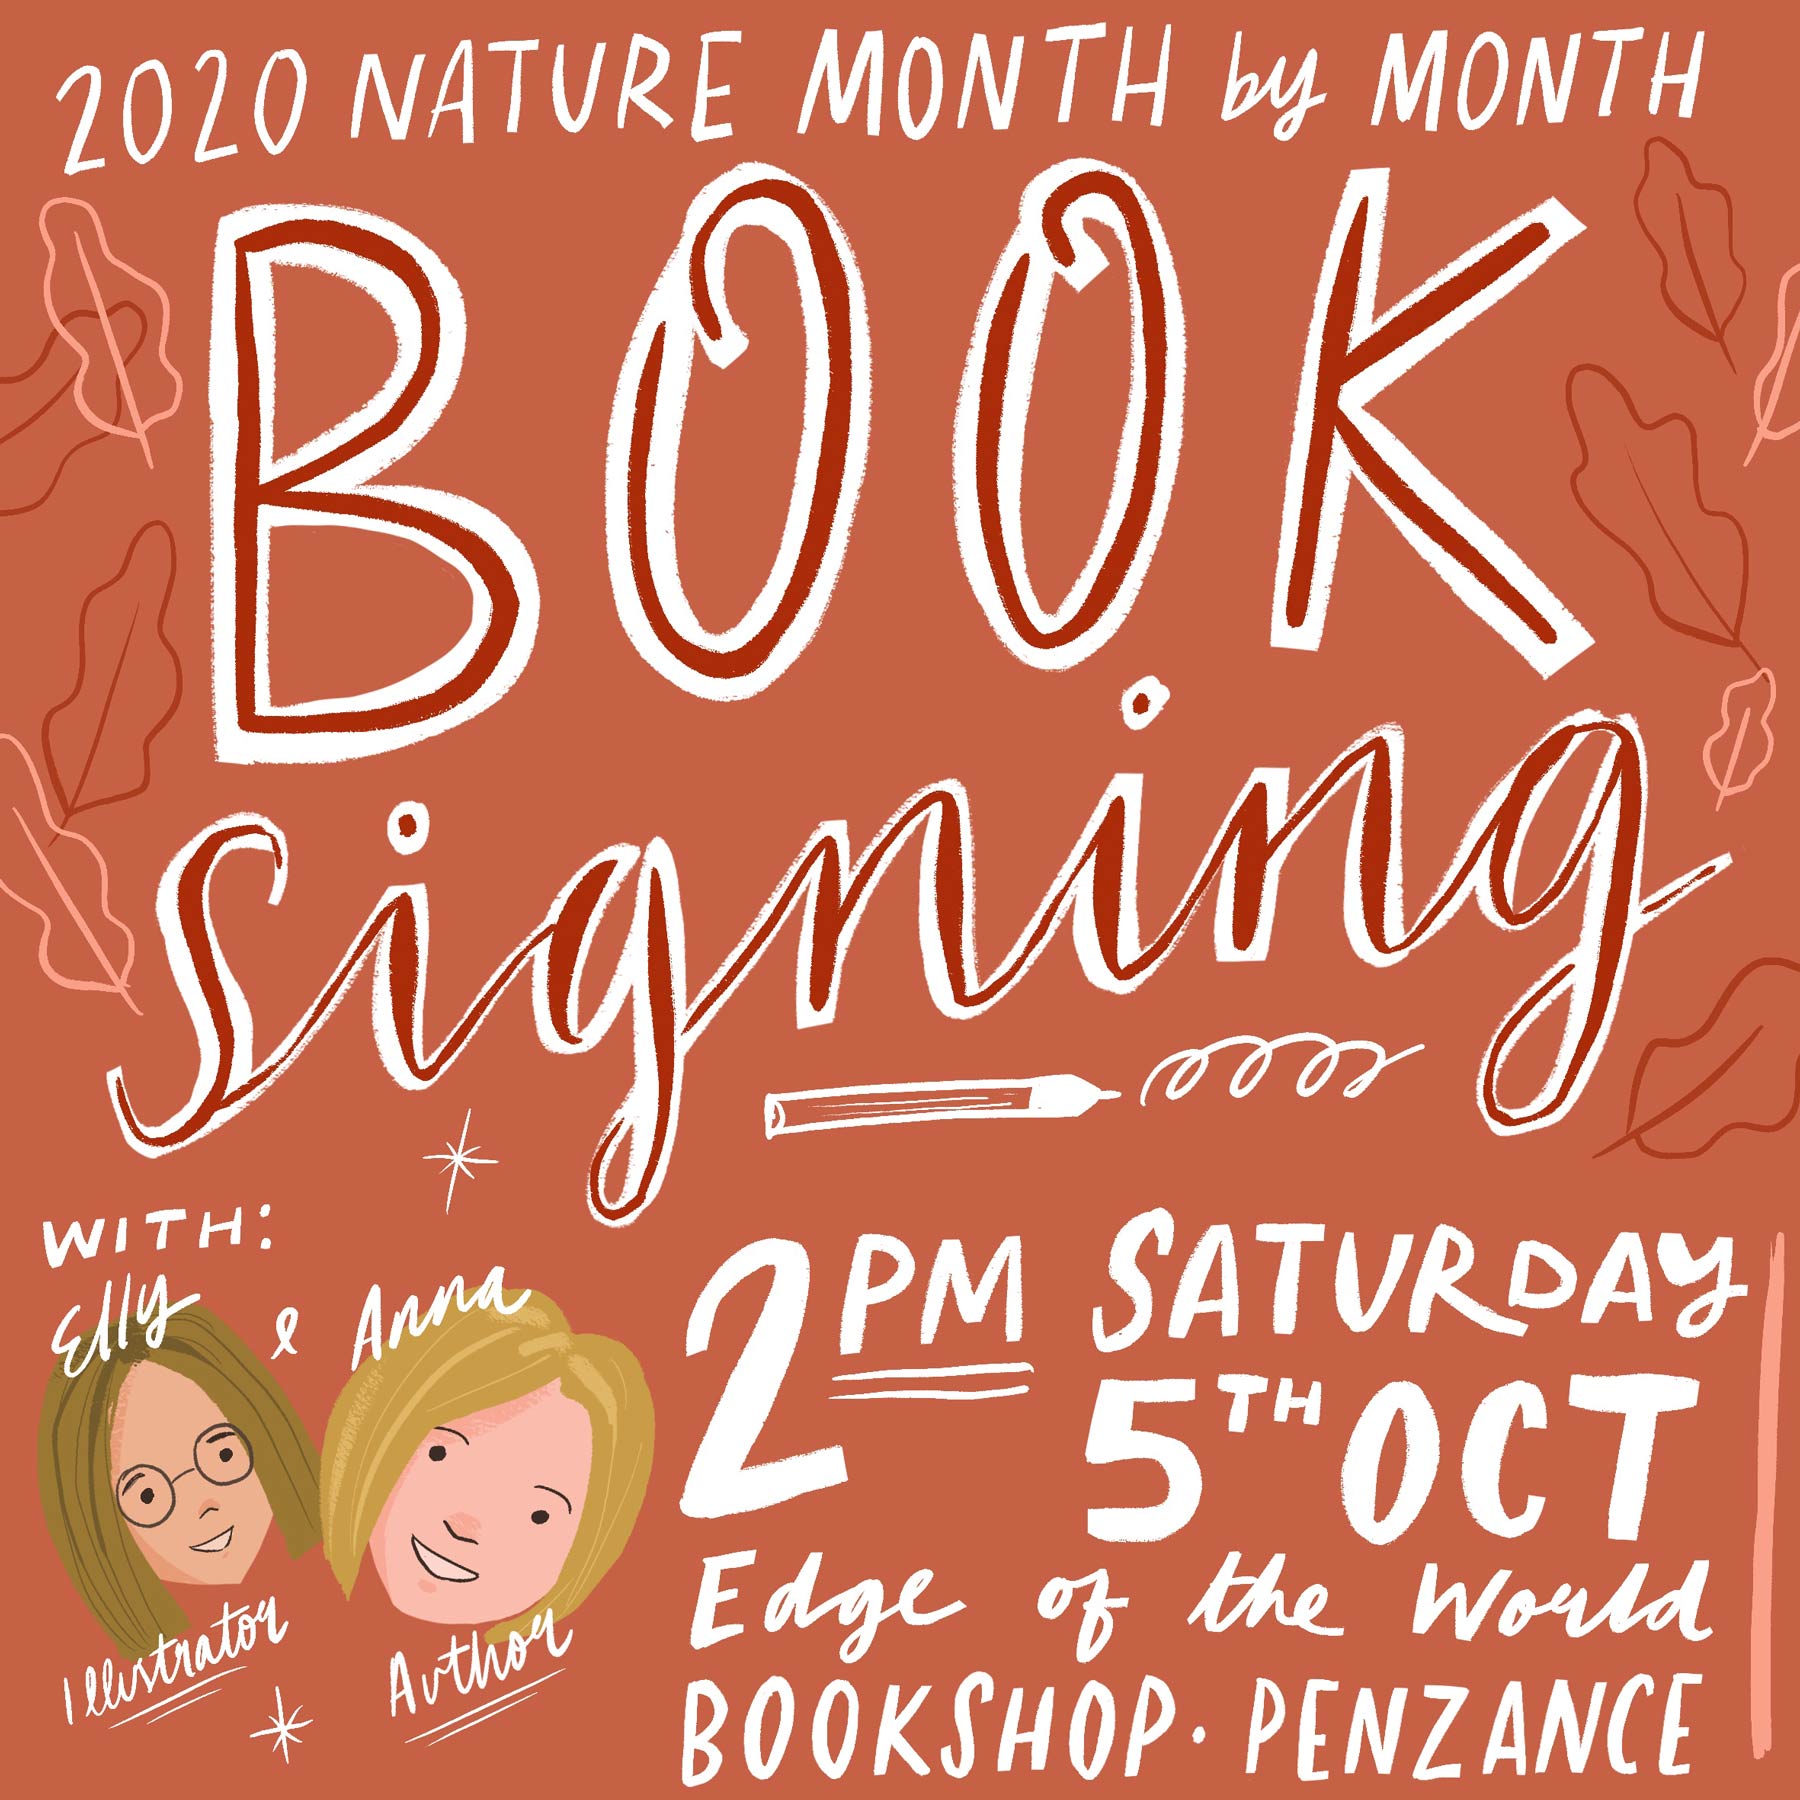 Book signing with Elly Jahnz and Anna Wilson